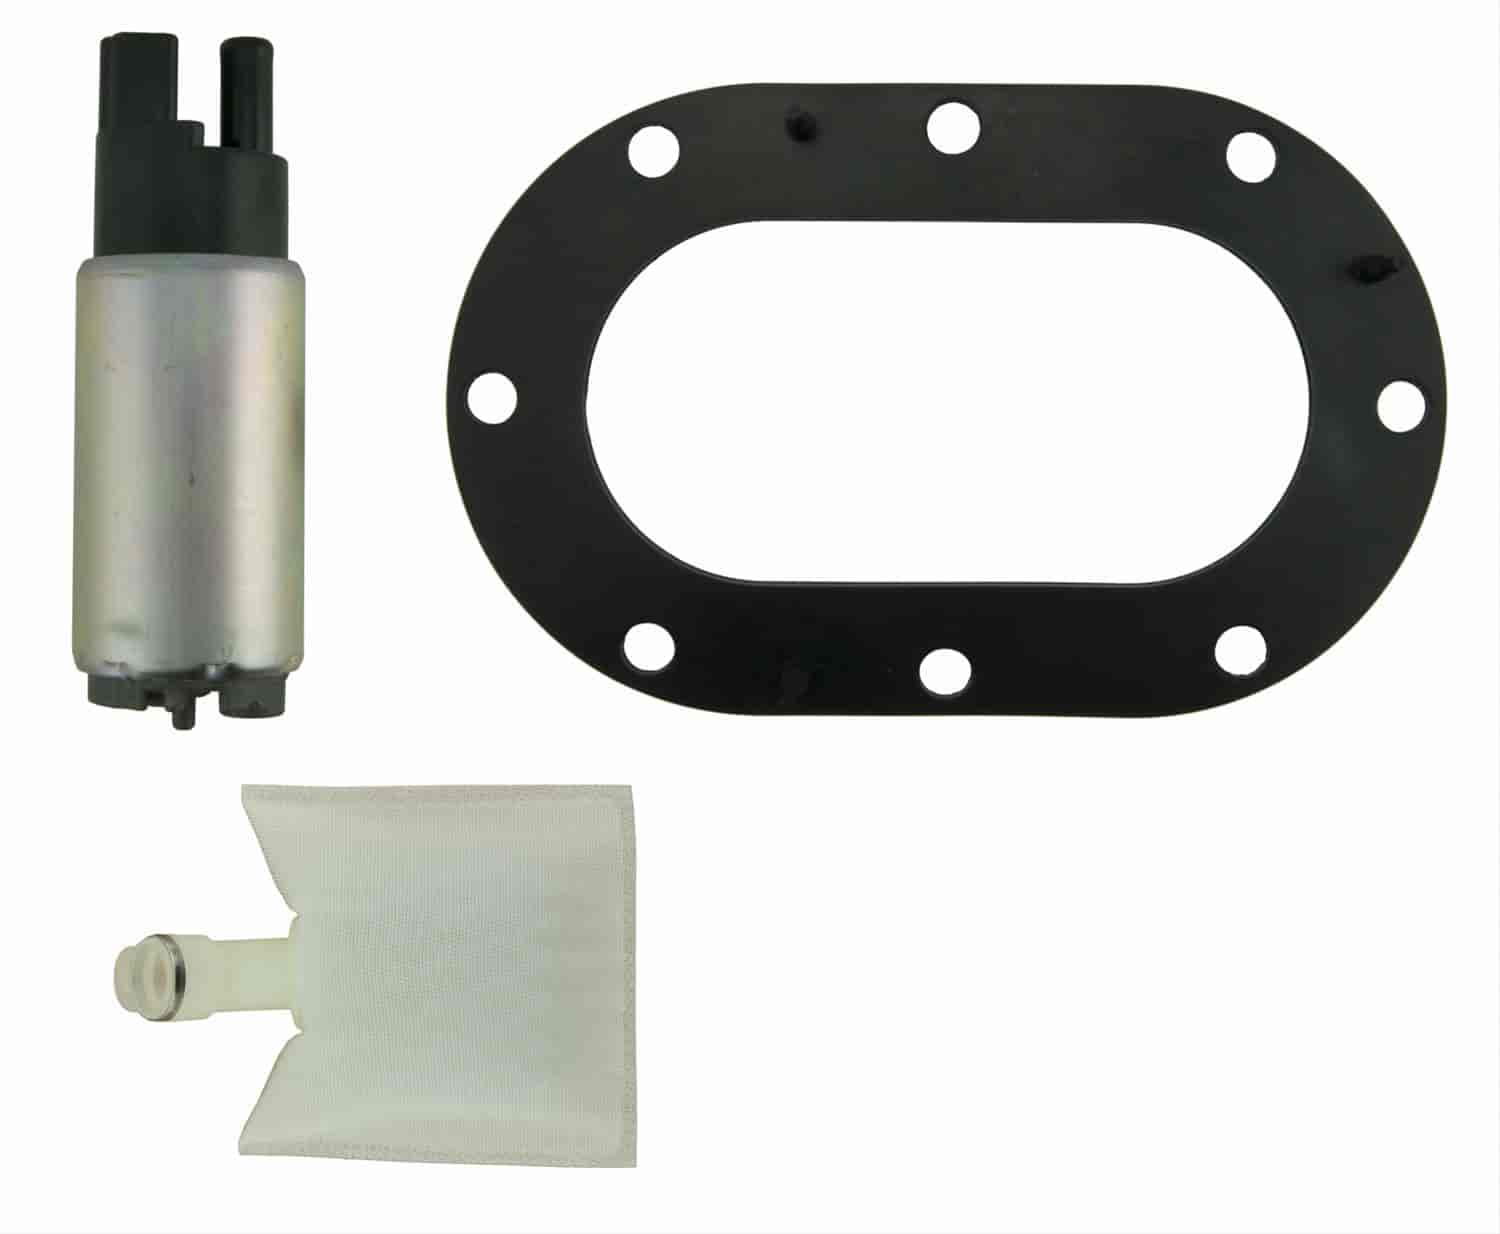 EFI In-Tank Electric Fuel Pump And Strainer Set for 1995-2005 Subaru Forester/Impreza